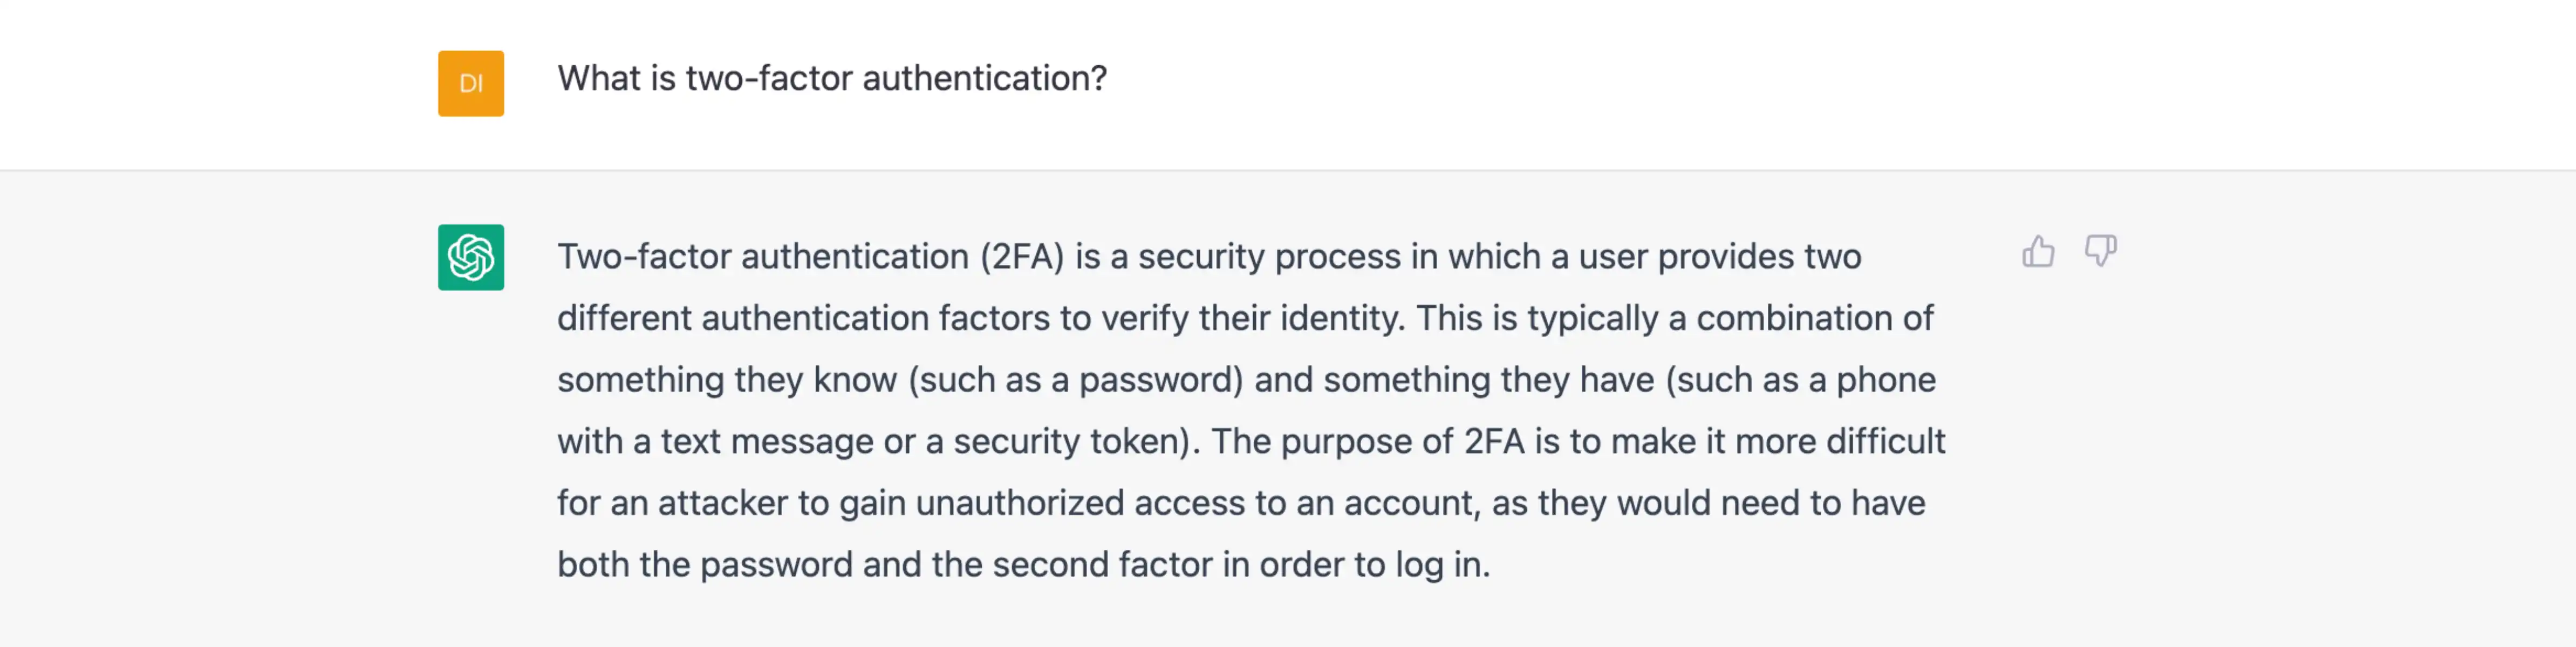 chatgpt_s answer to what is two factor authentication